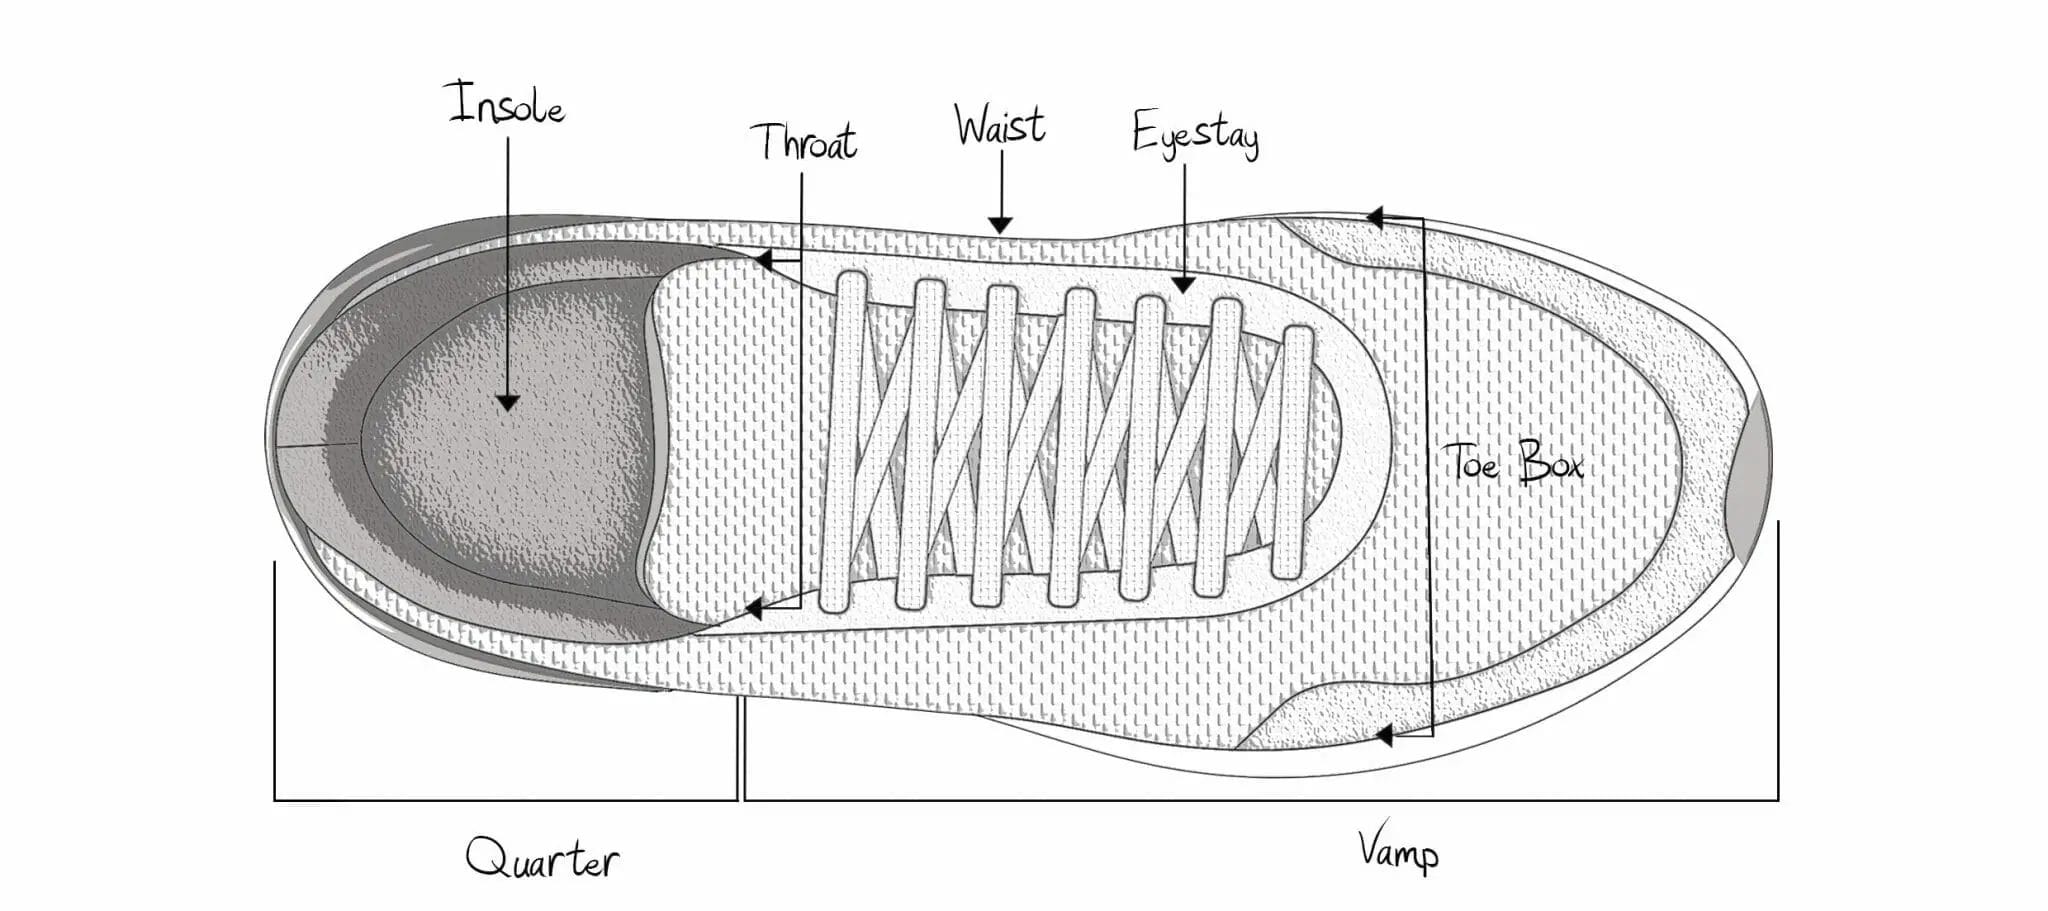 what is the bottom of a shoe called